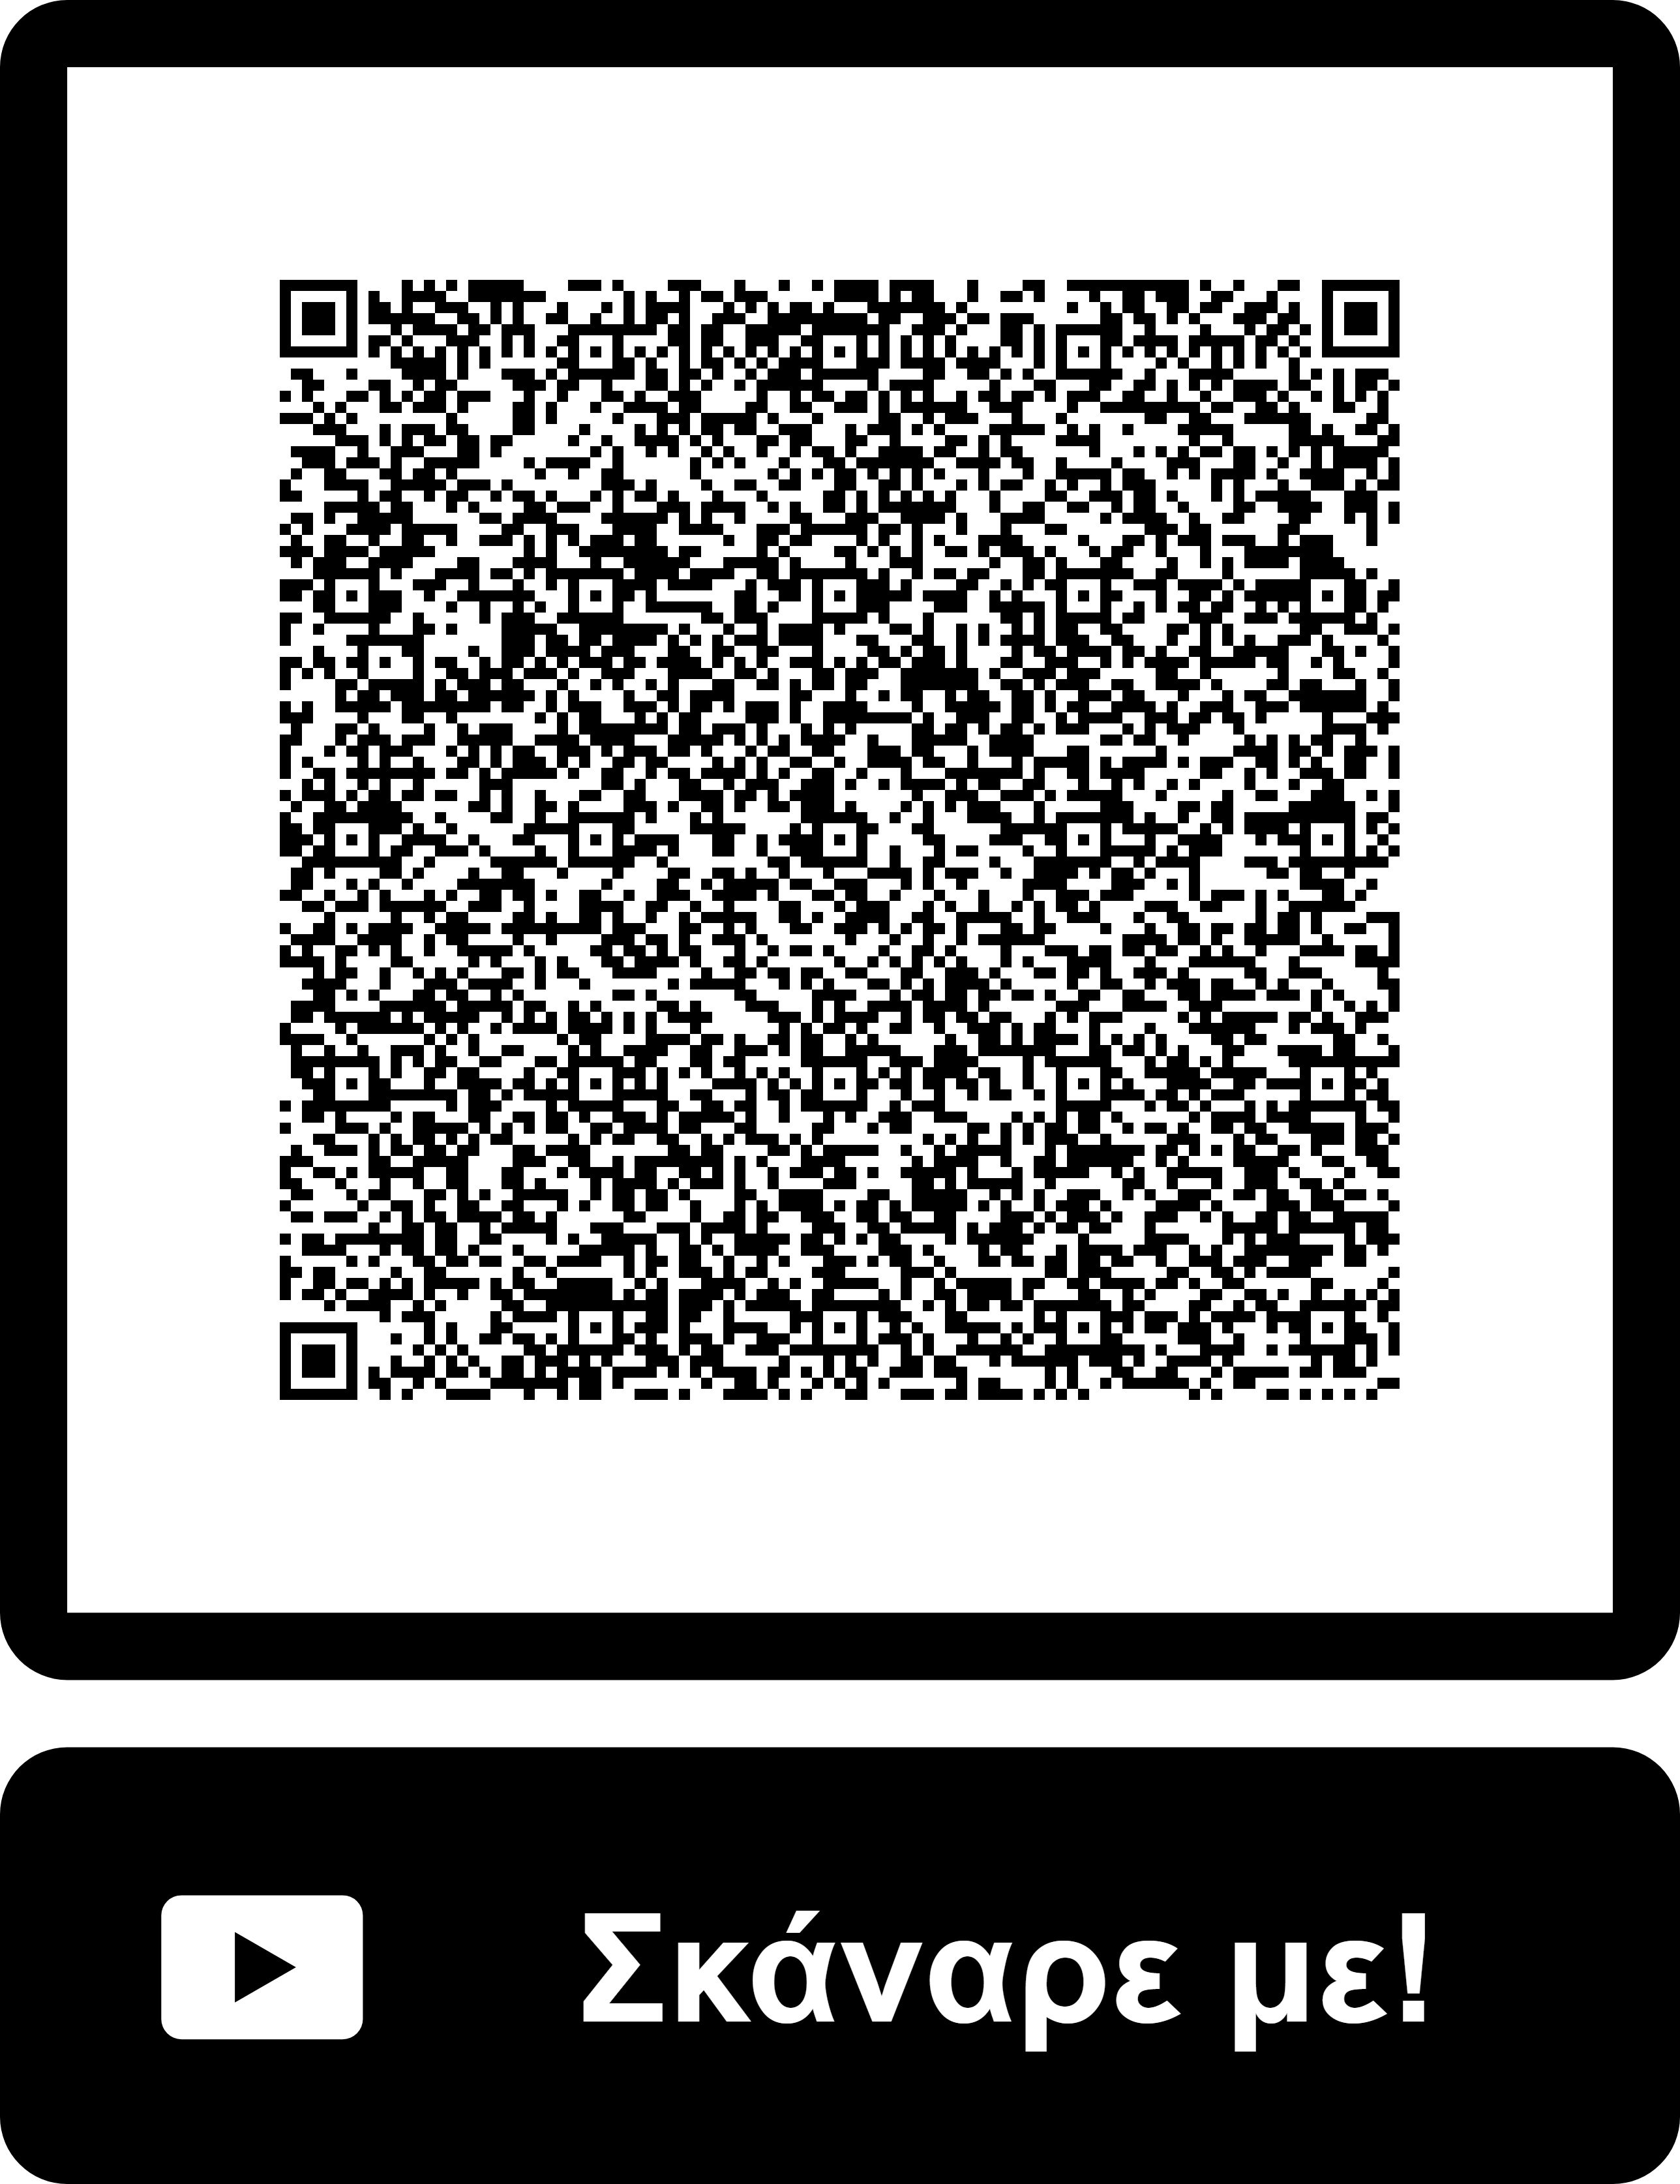 QRCODE τηλ εκτακτης αναγκης